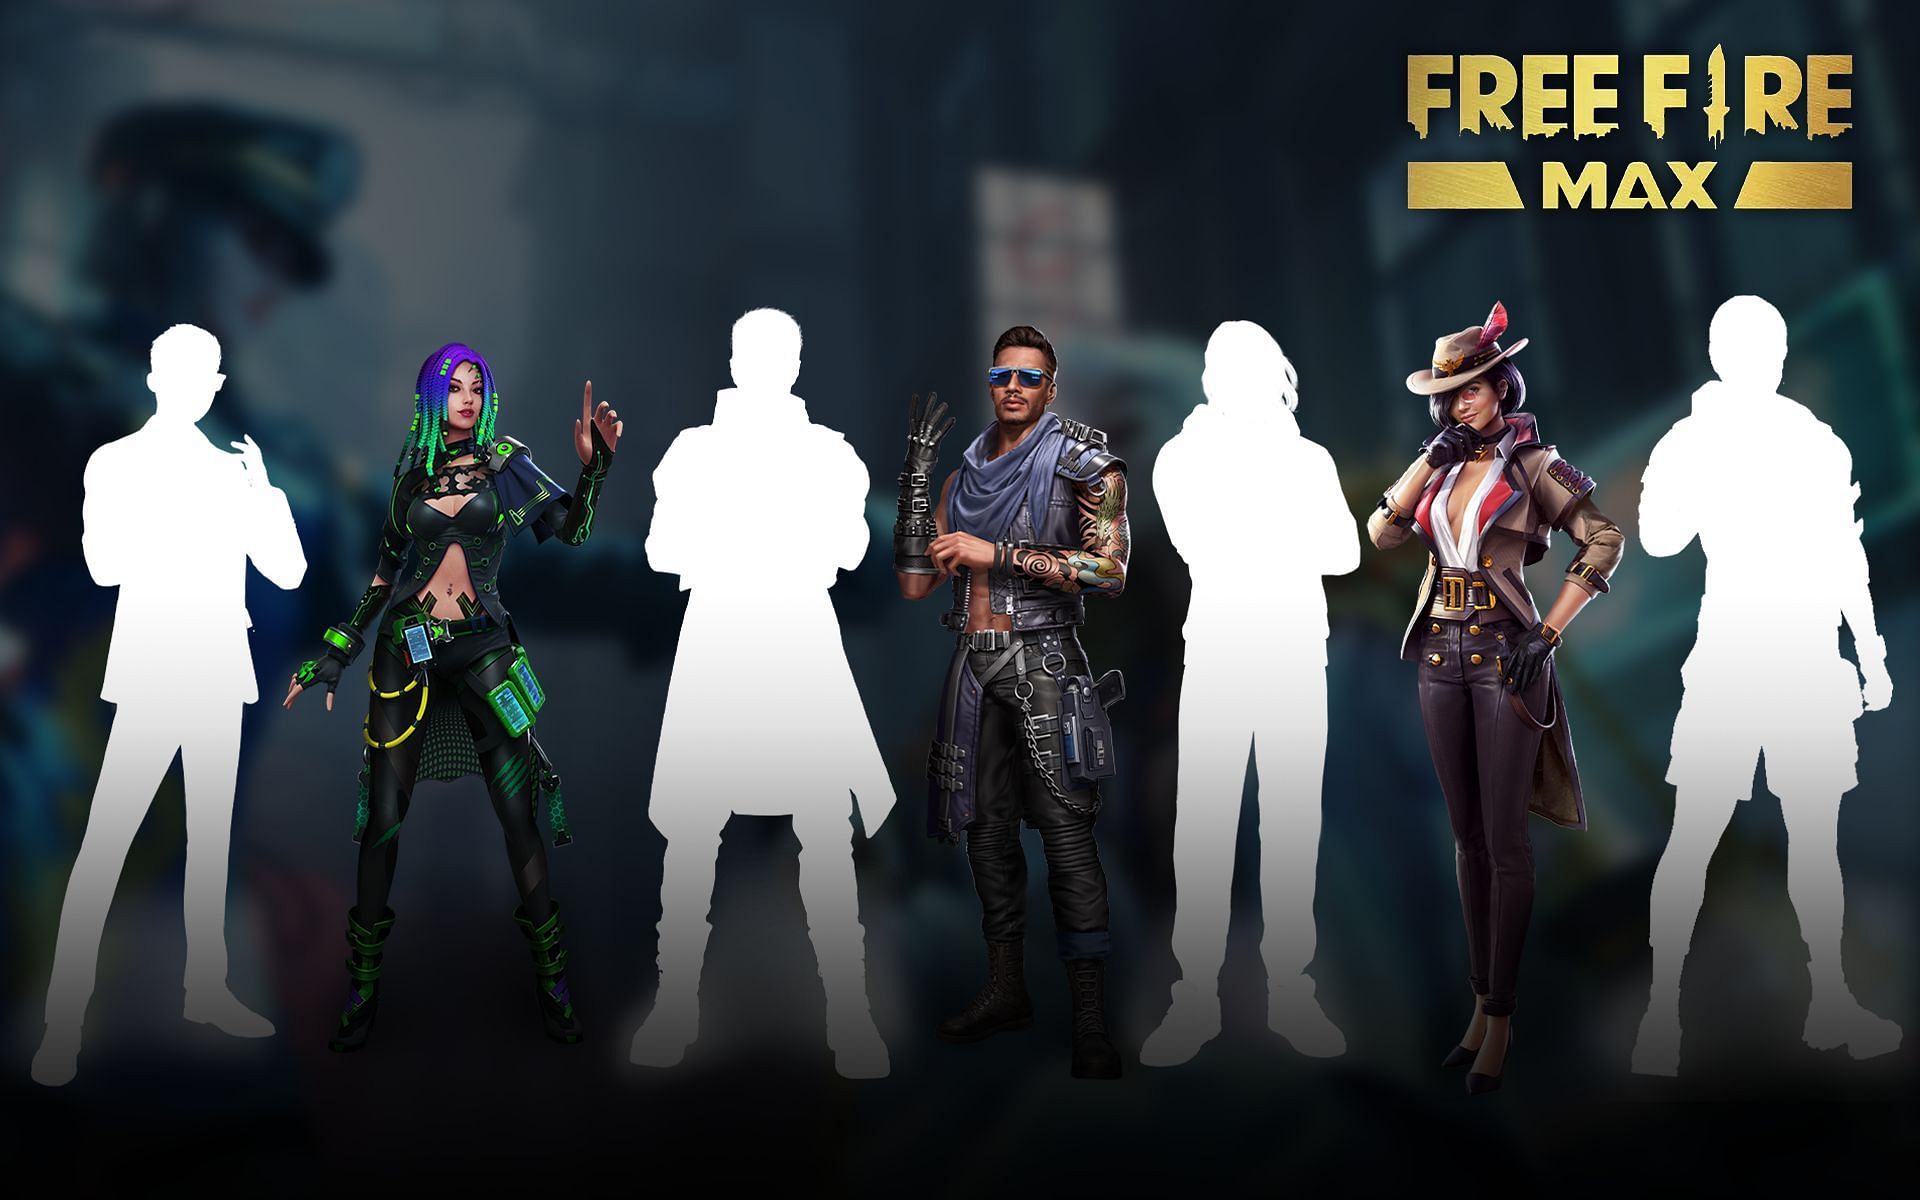 These characters are considered to be some of the best in Free Fire MAX (Image via Sportskeeda)